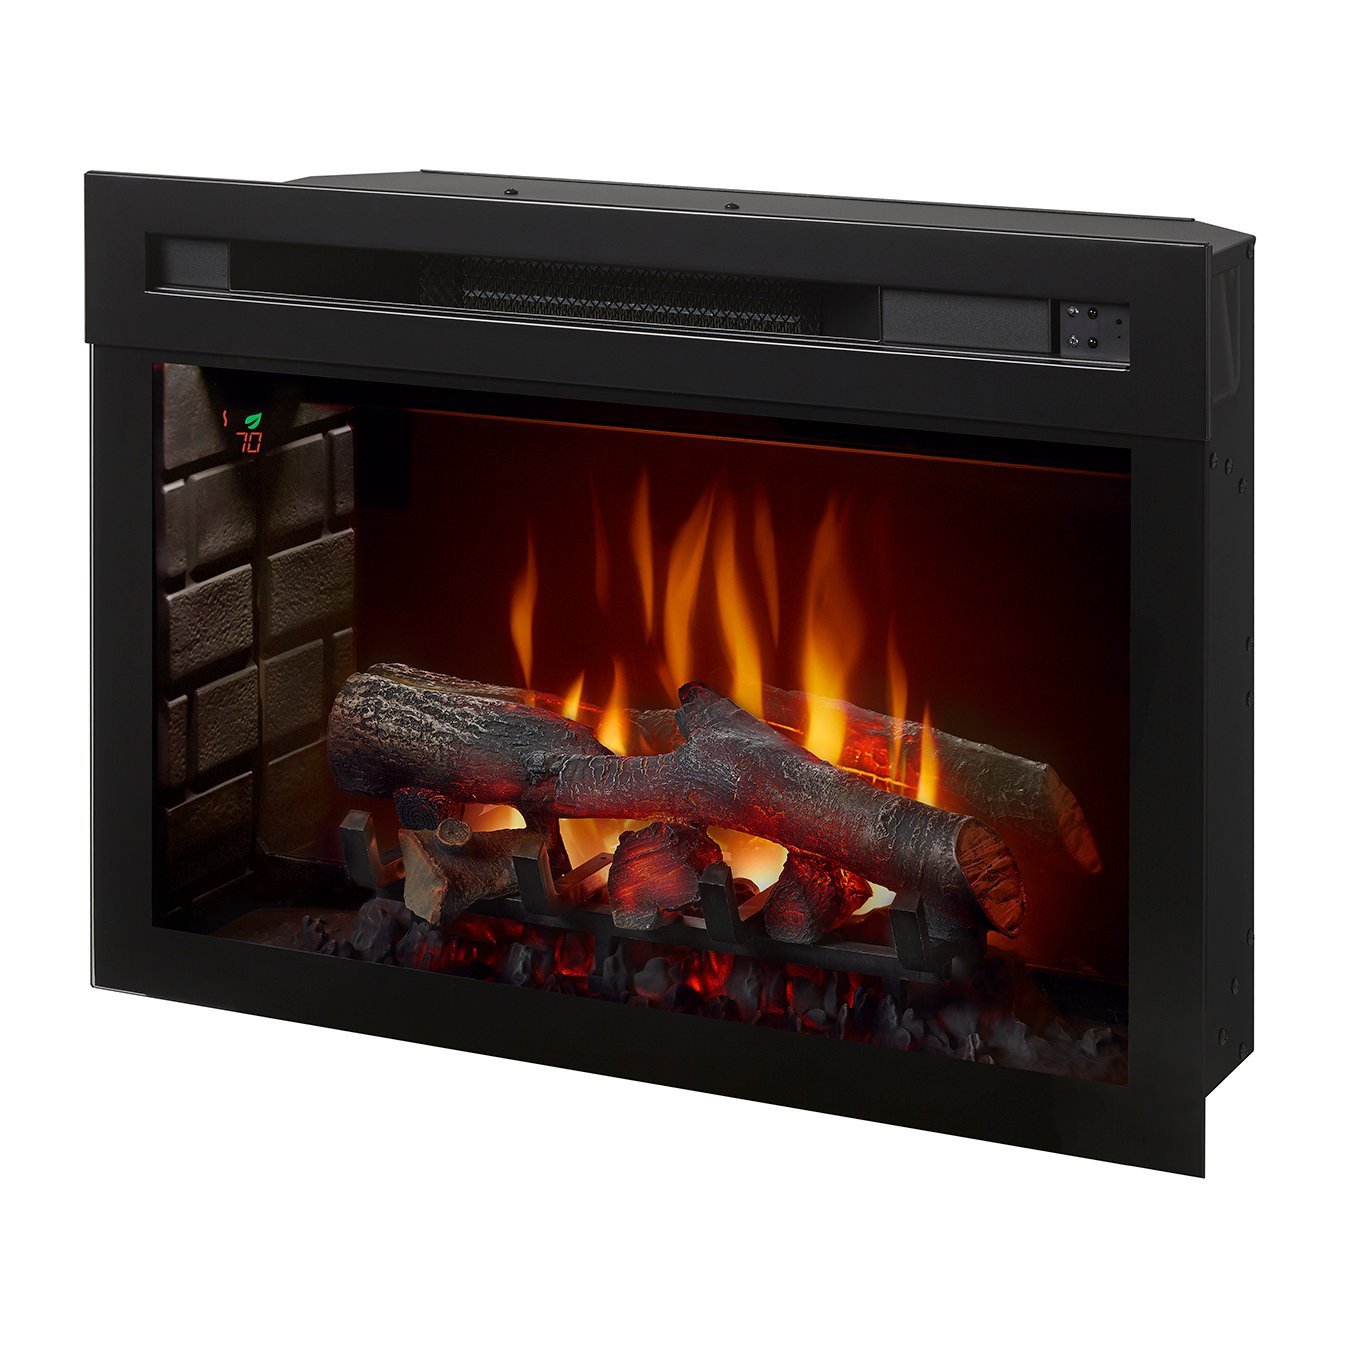 Electric Fireplace Inserts For Sale
 Dimplex 25 Inch Multi Fire XD™ Electric Fireplace Insert